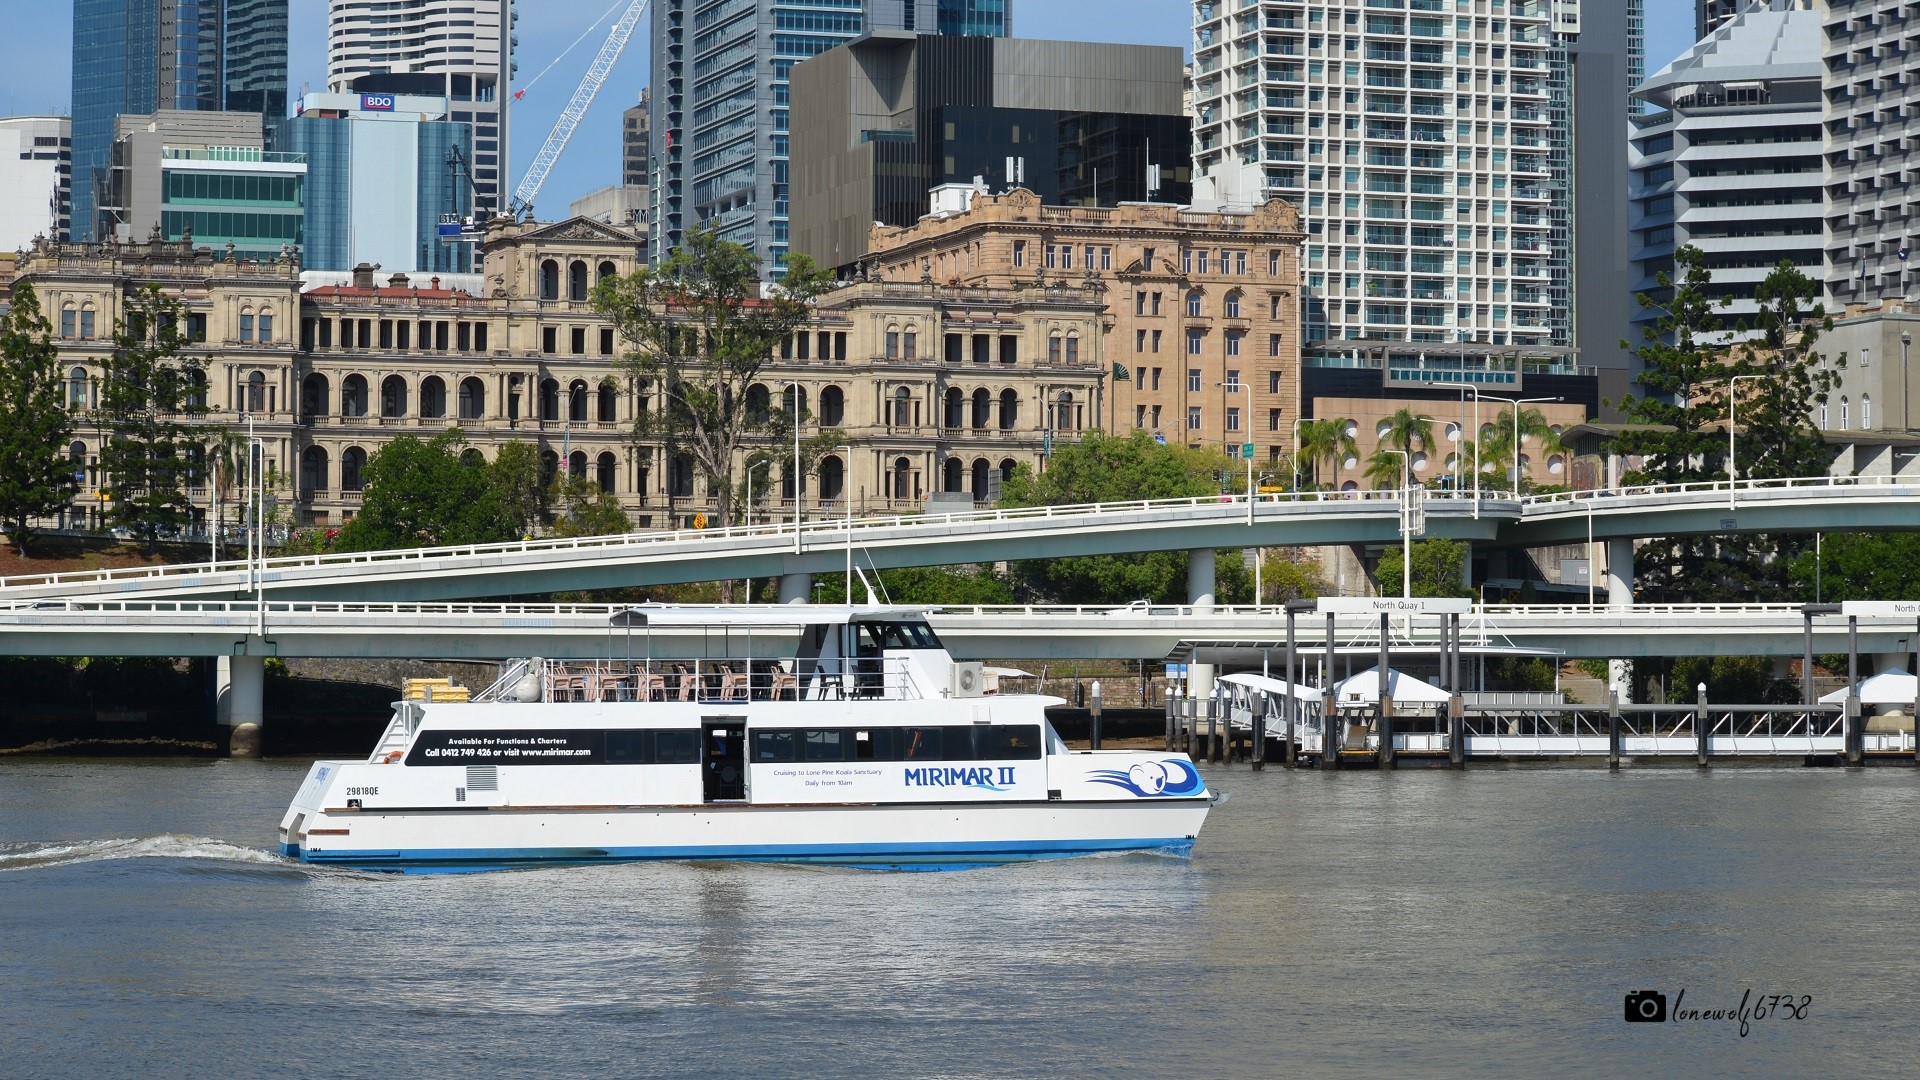 vehicles, ferry, brisbane, building, city, river, wharf Free Background